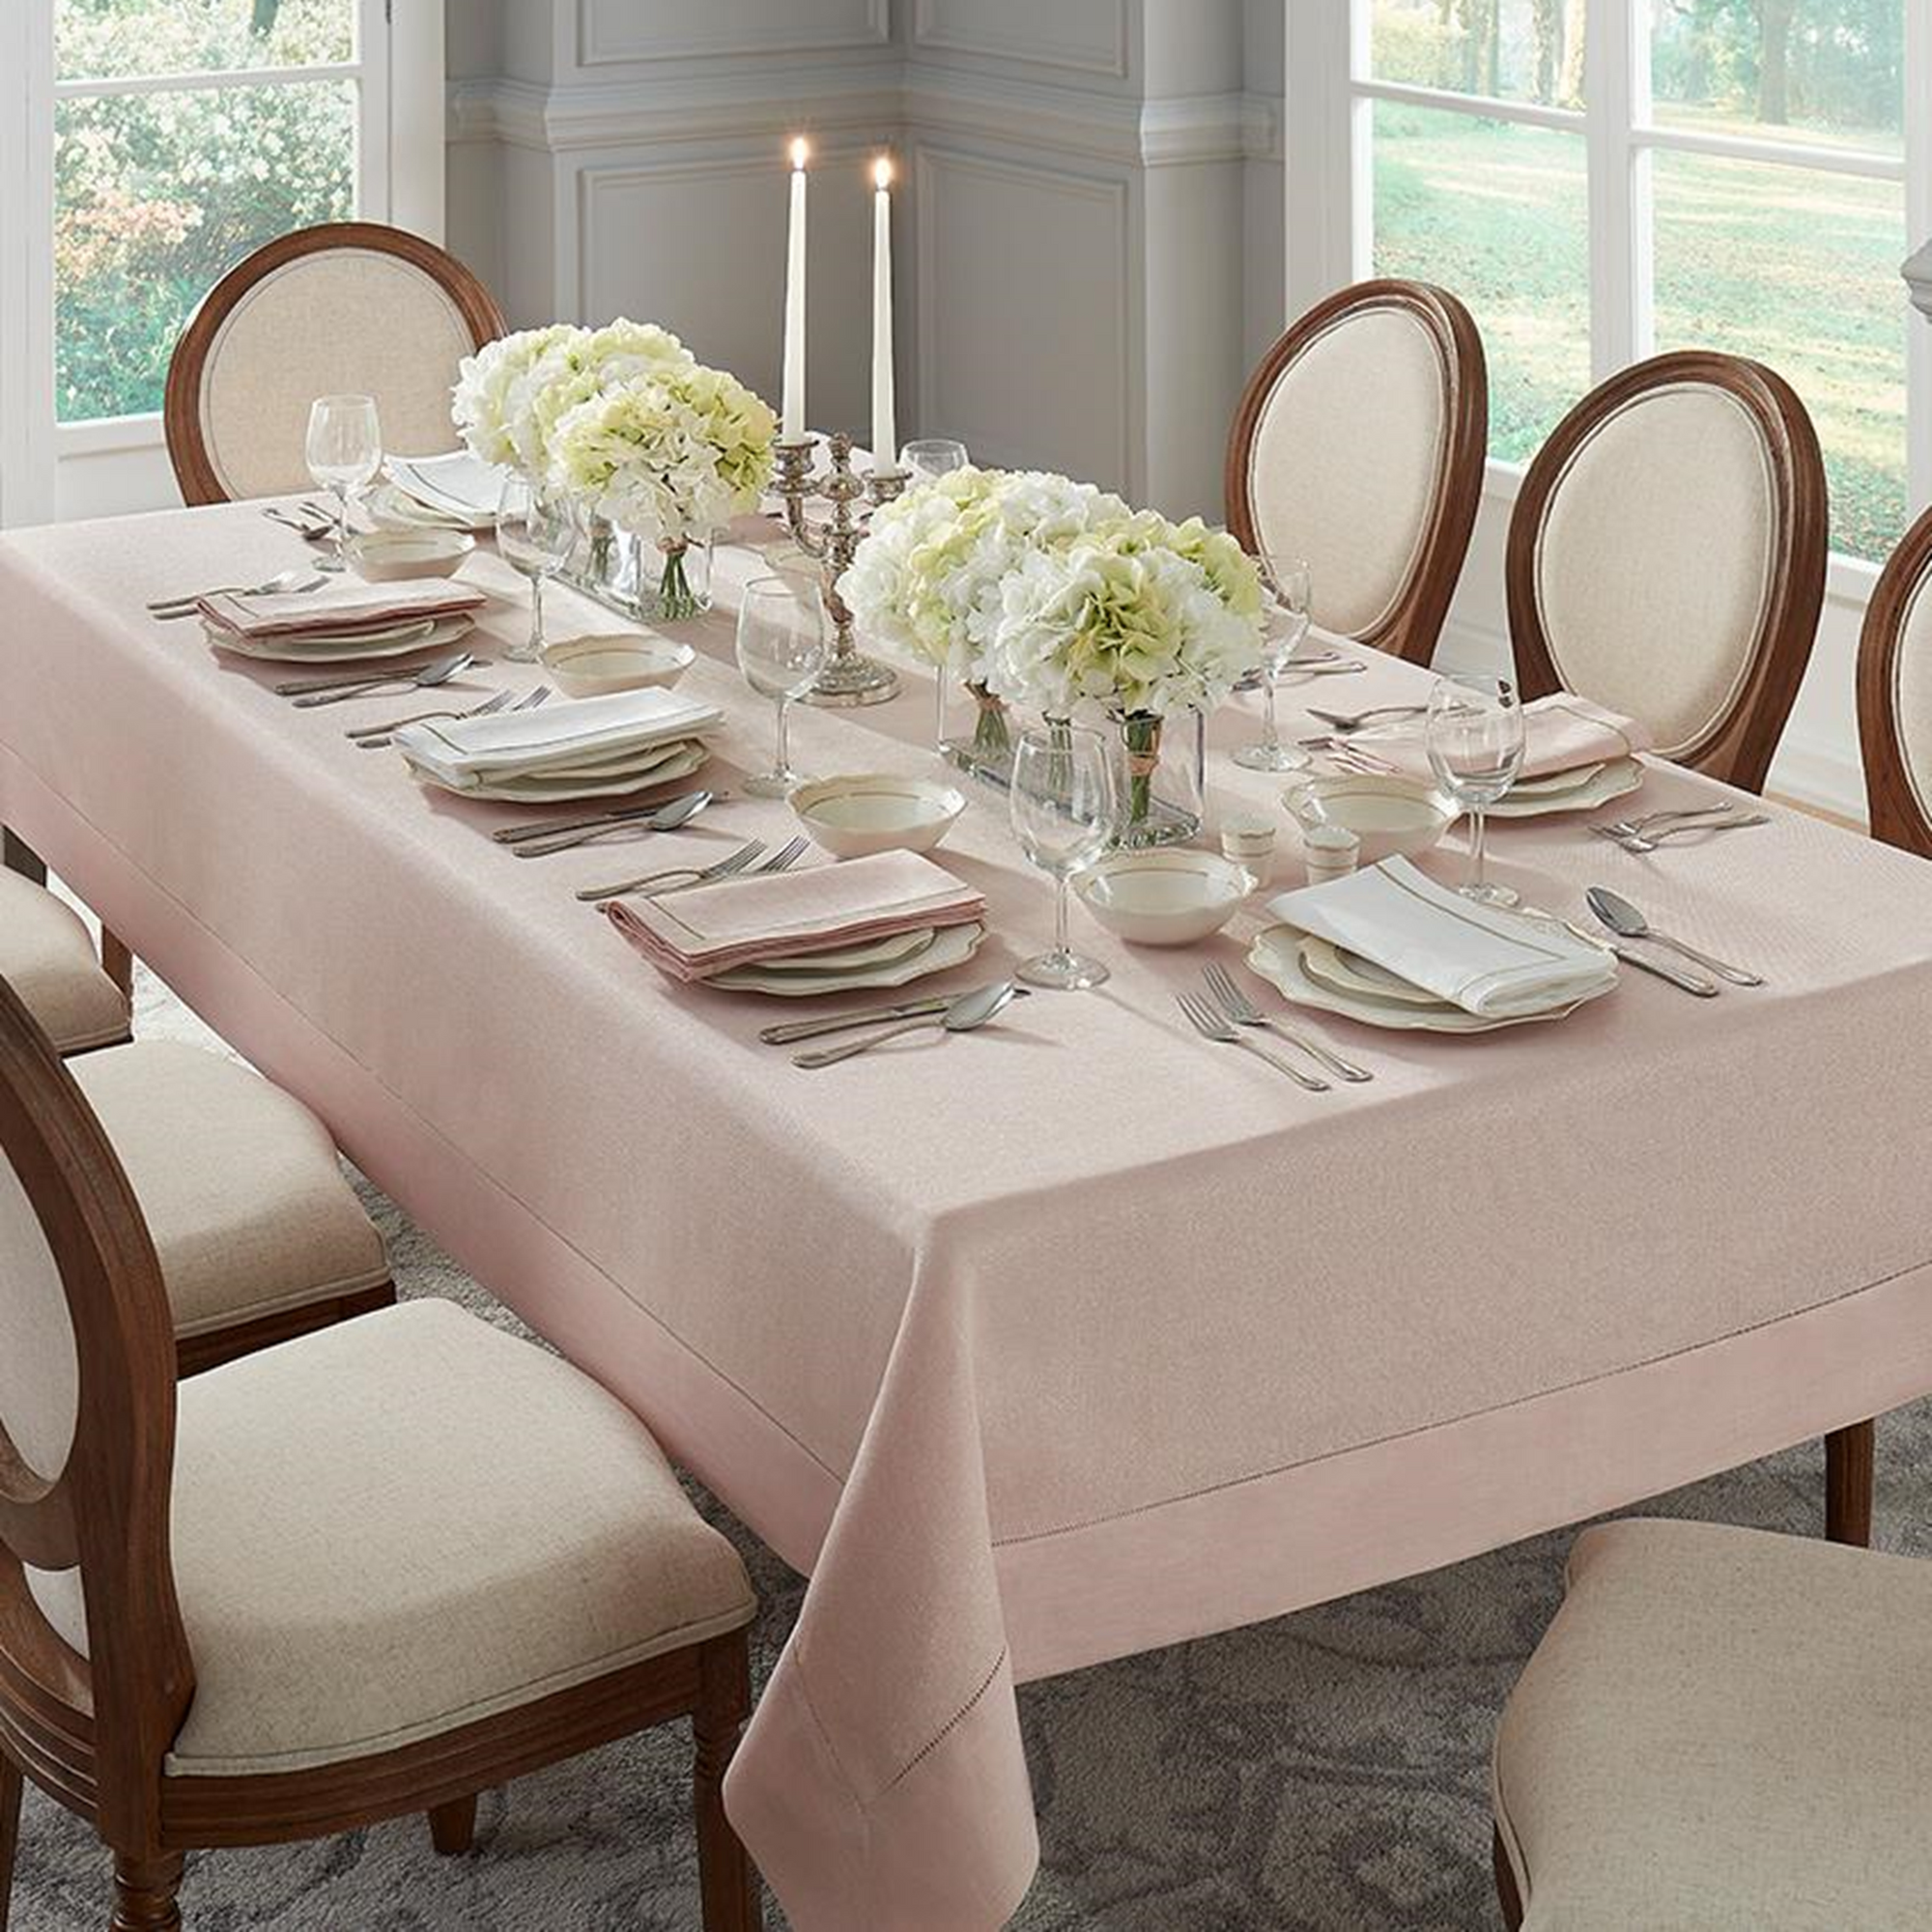 Lifestyle Image of Sferra Reece Table Linens in Petal/Gold Color